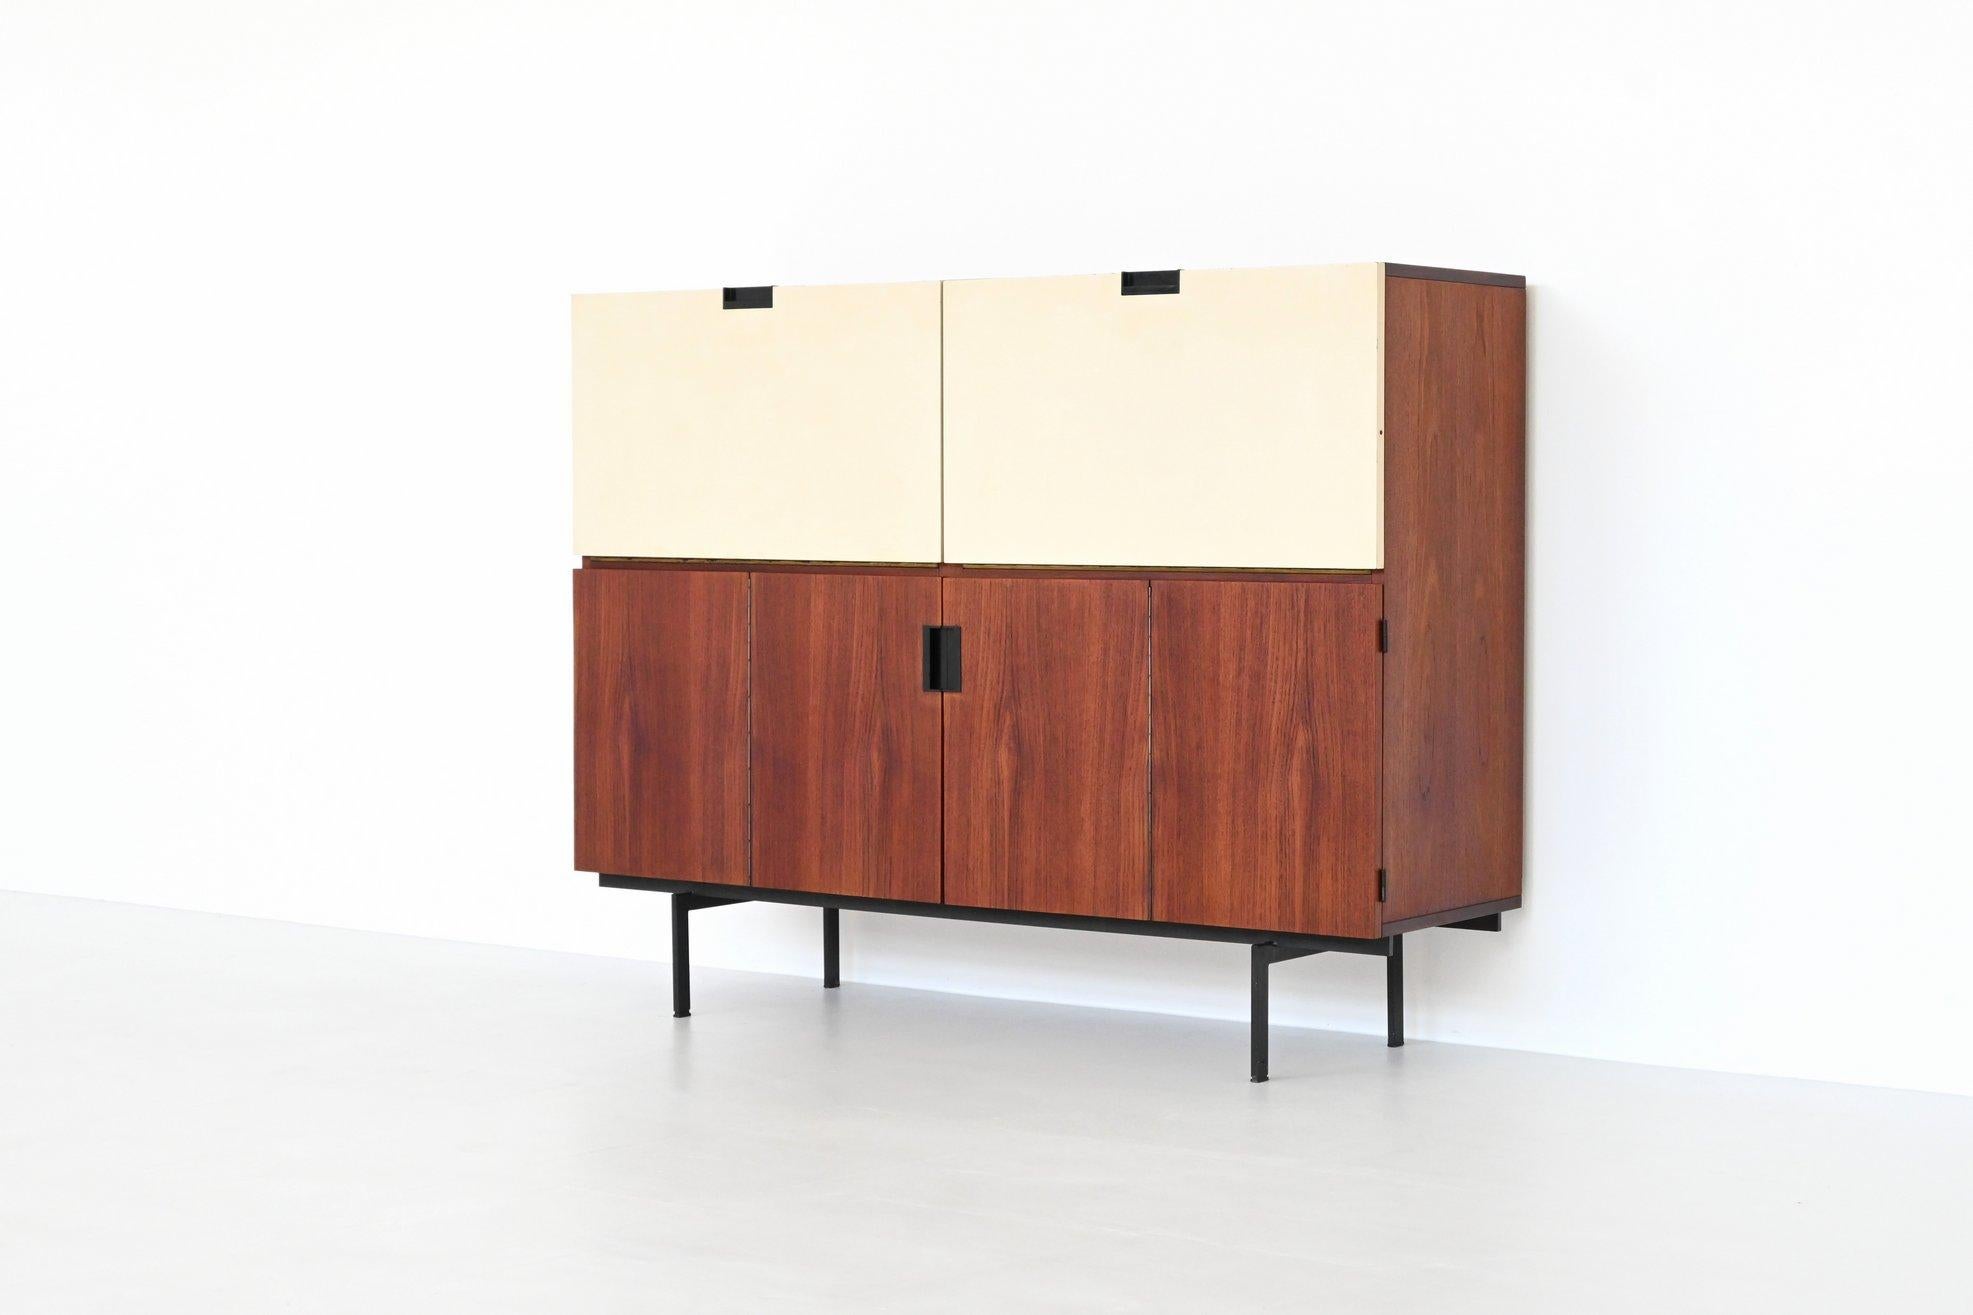 Beautiful symmetric cabinet model CU07 of the Japanese Series designed by Cees Braakman for Pastoe, The Netherlands 1958. This minimalistic high cabinet is made of nicely grained teak wood in combination with two white lacquered dropdown doors and